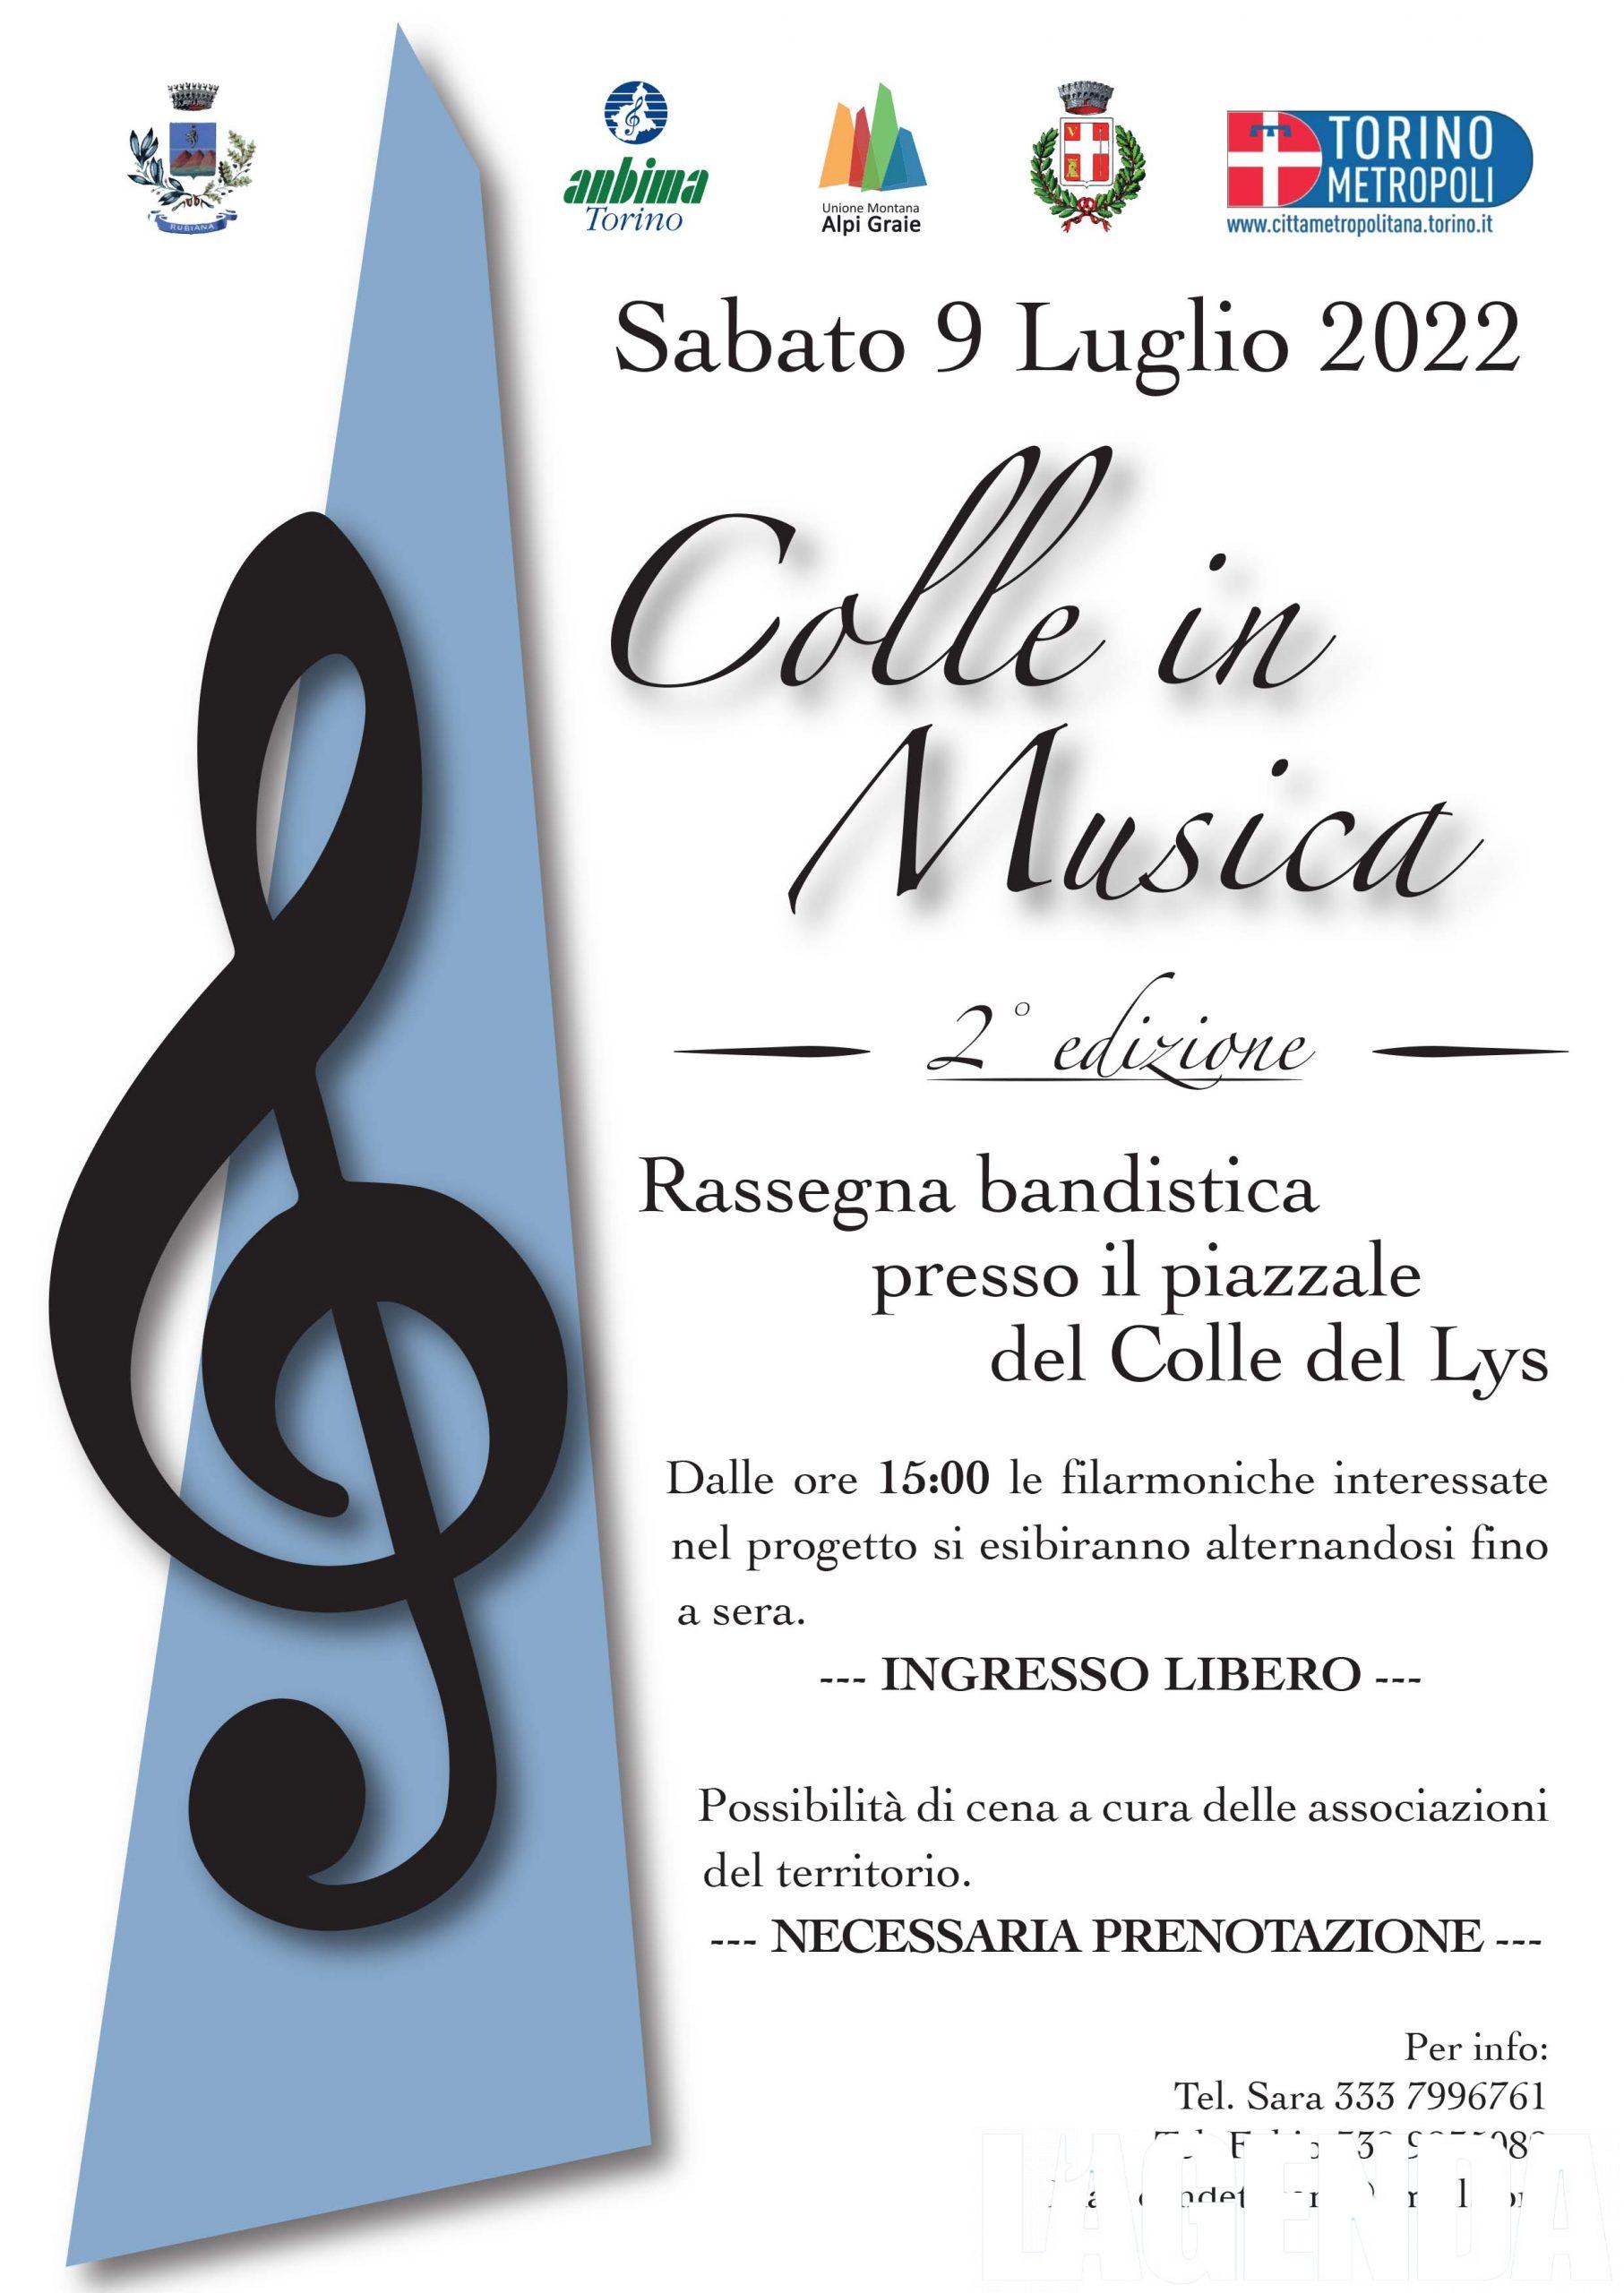 Colle in musica